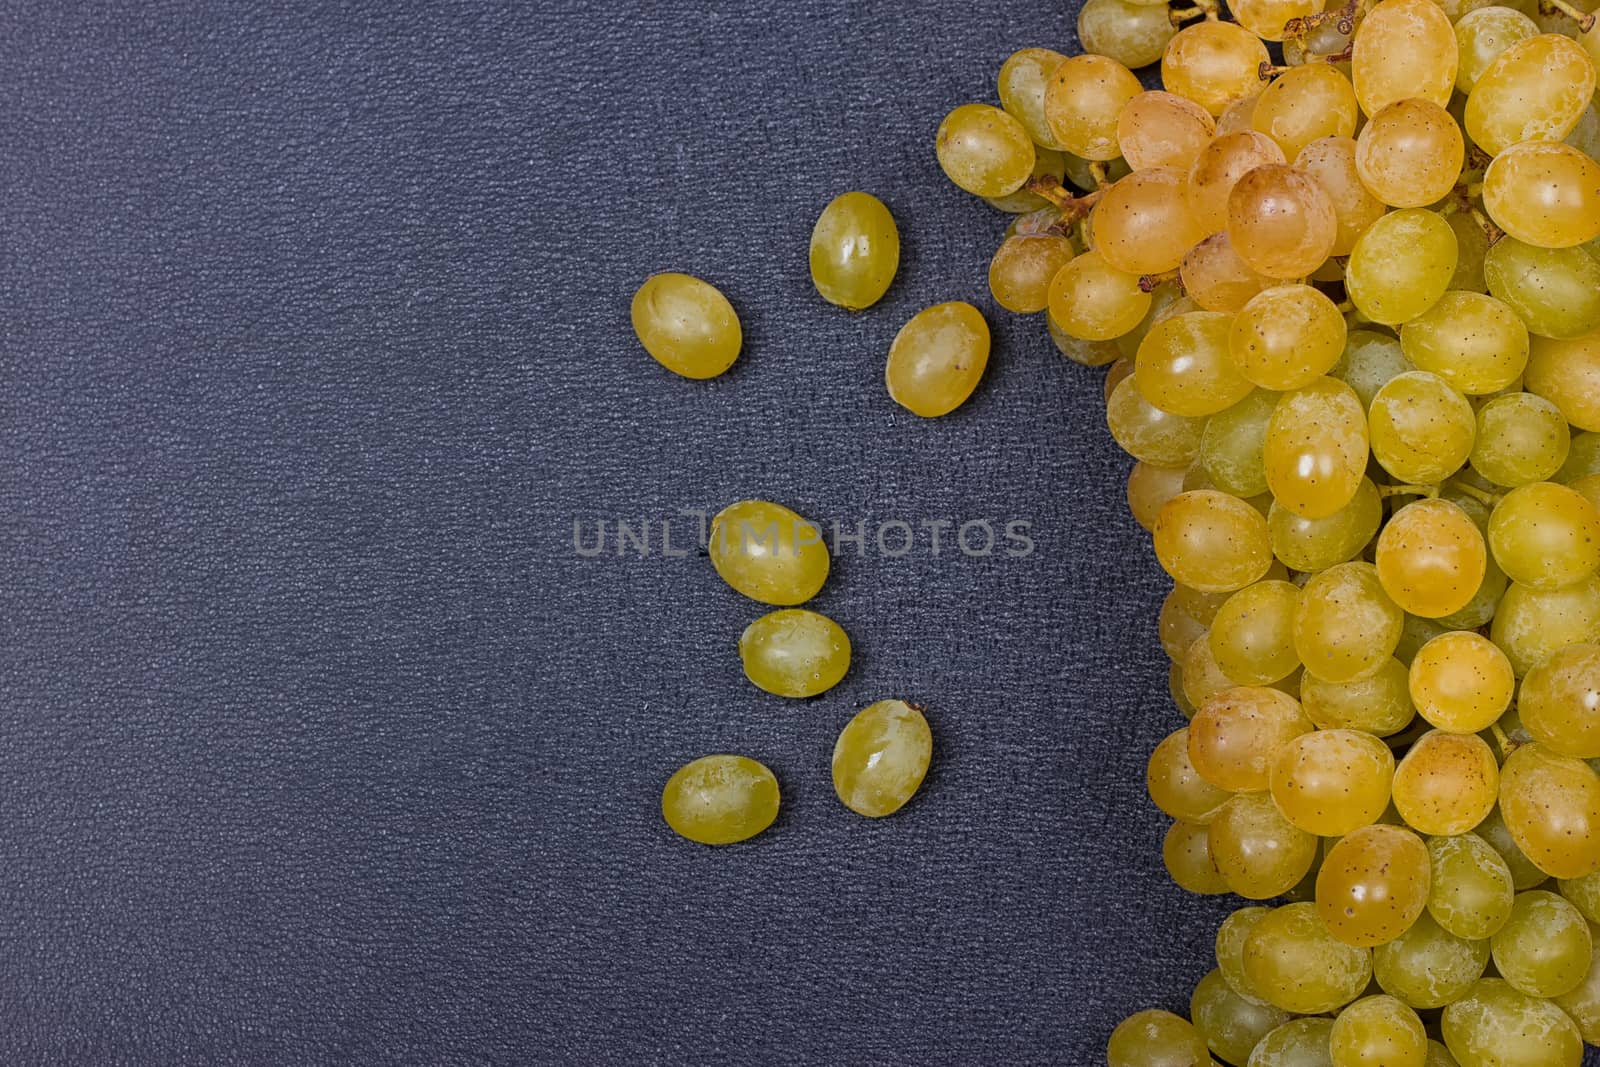 White grapes on a black background by victosha